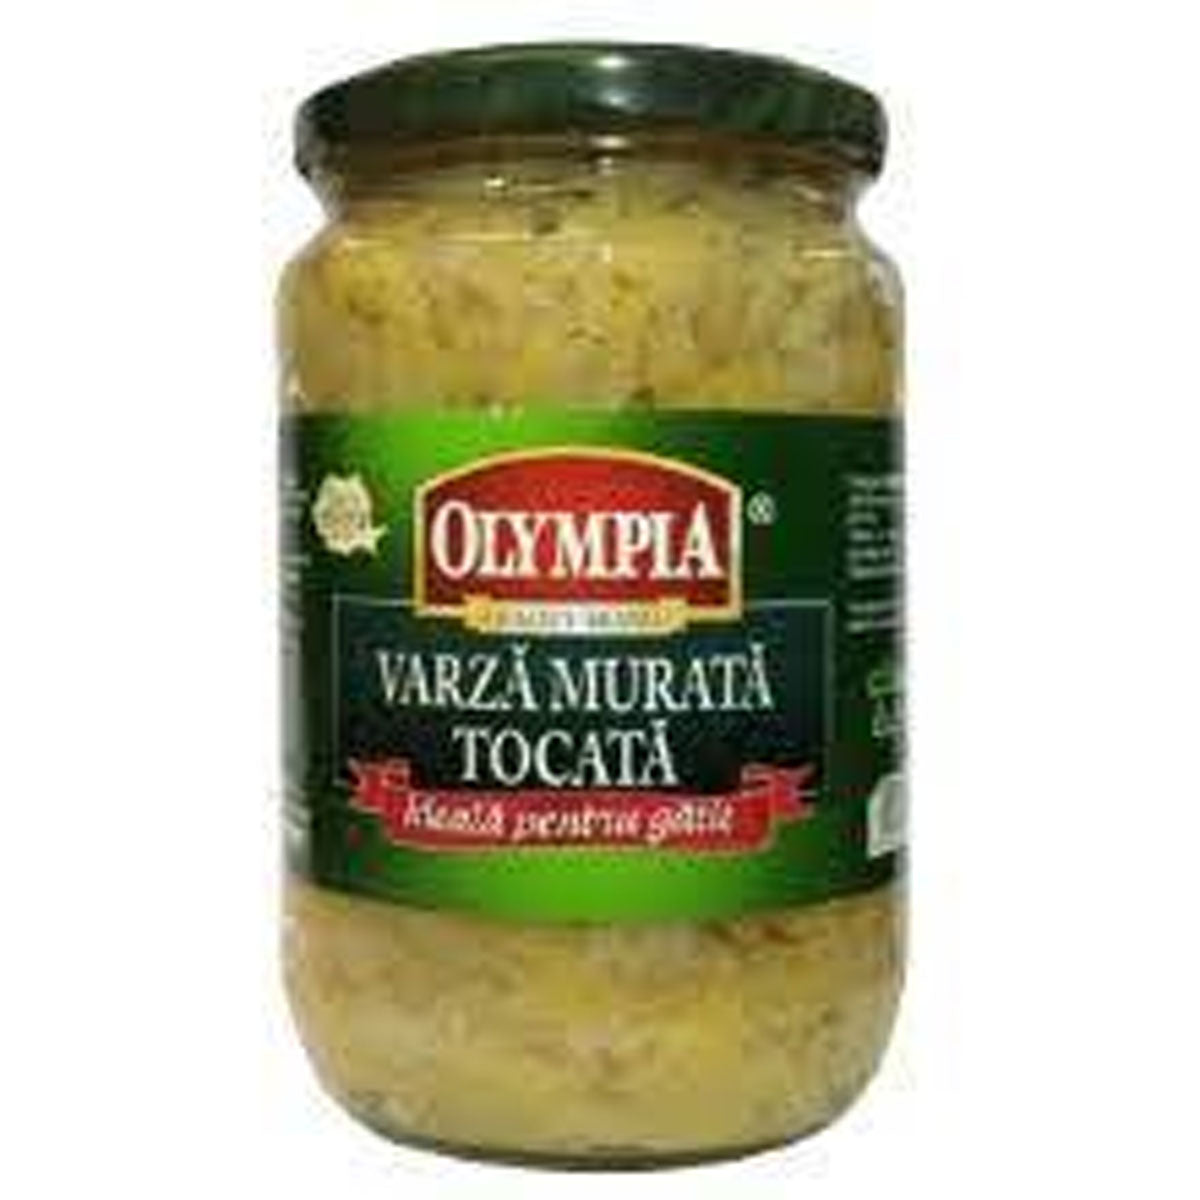 A jar of Olympia Chopped Sour Cabbage - 720g tota.